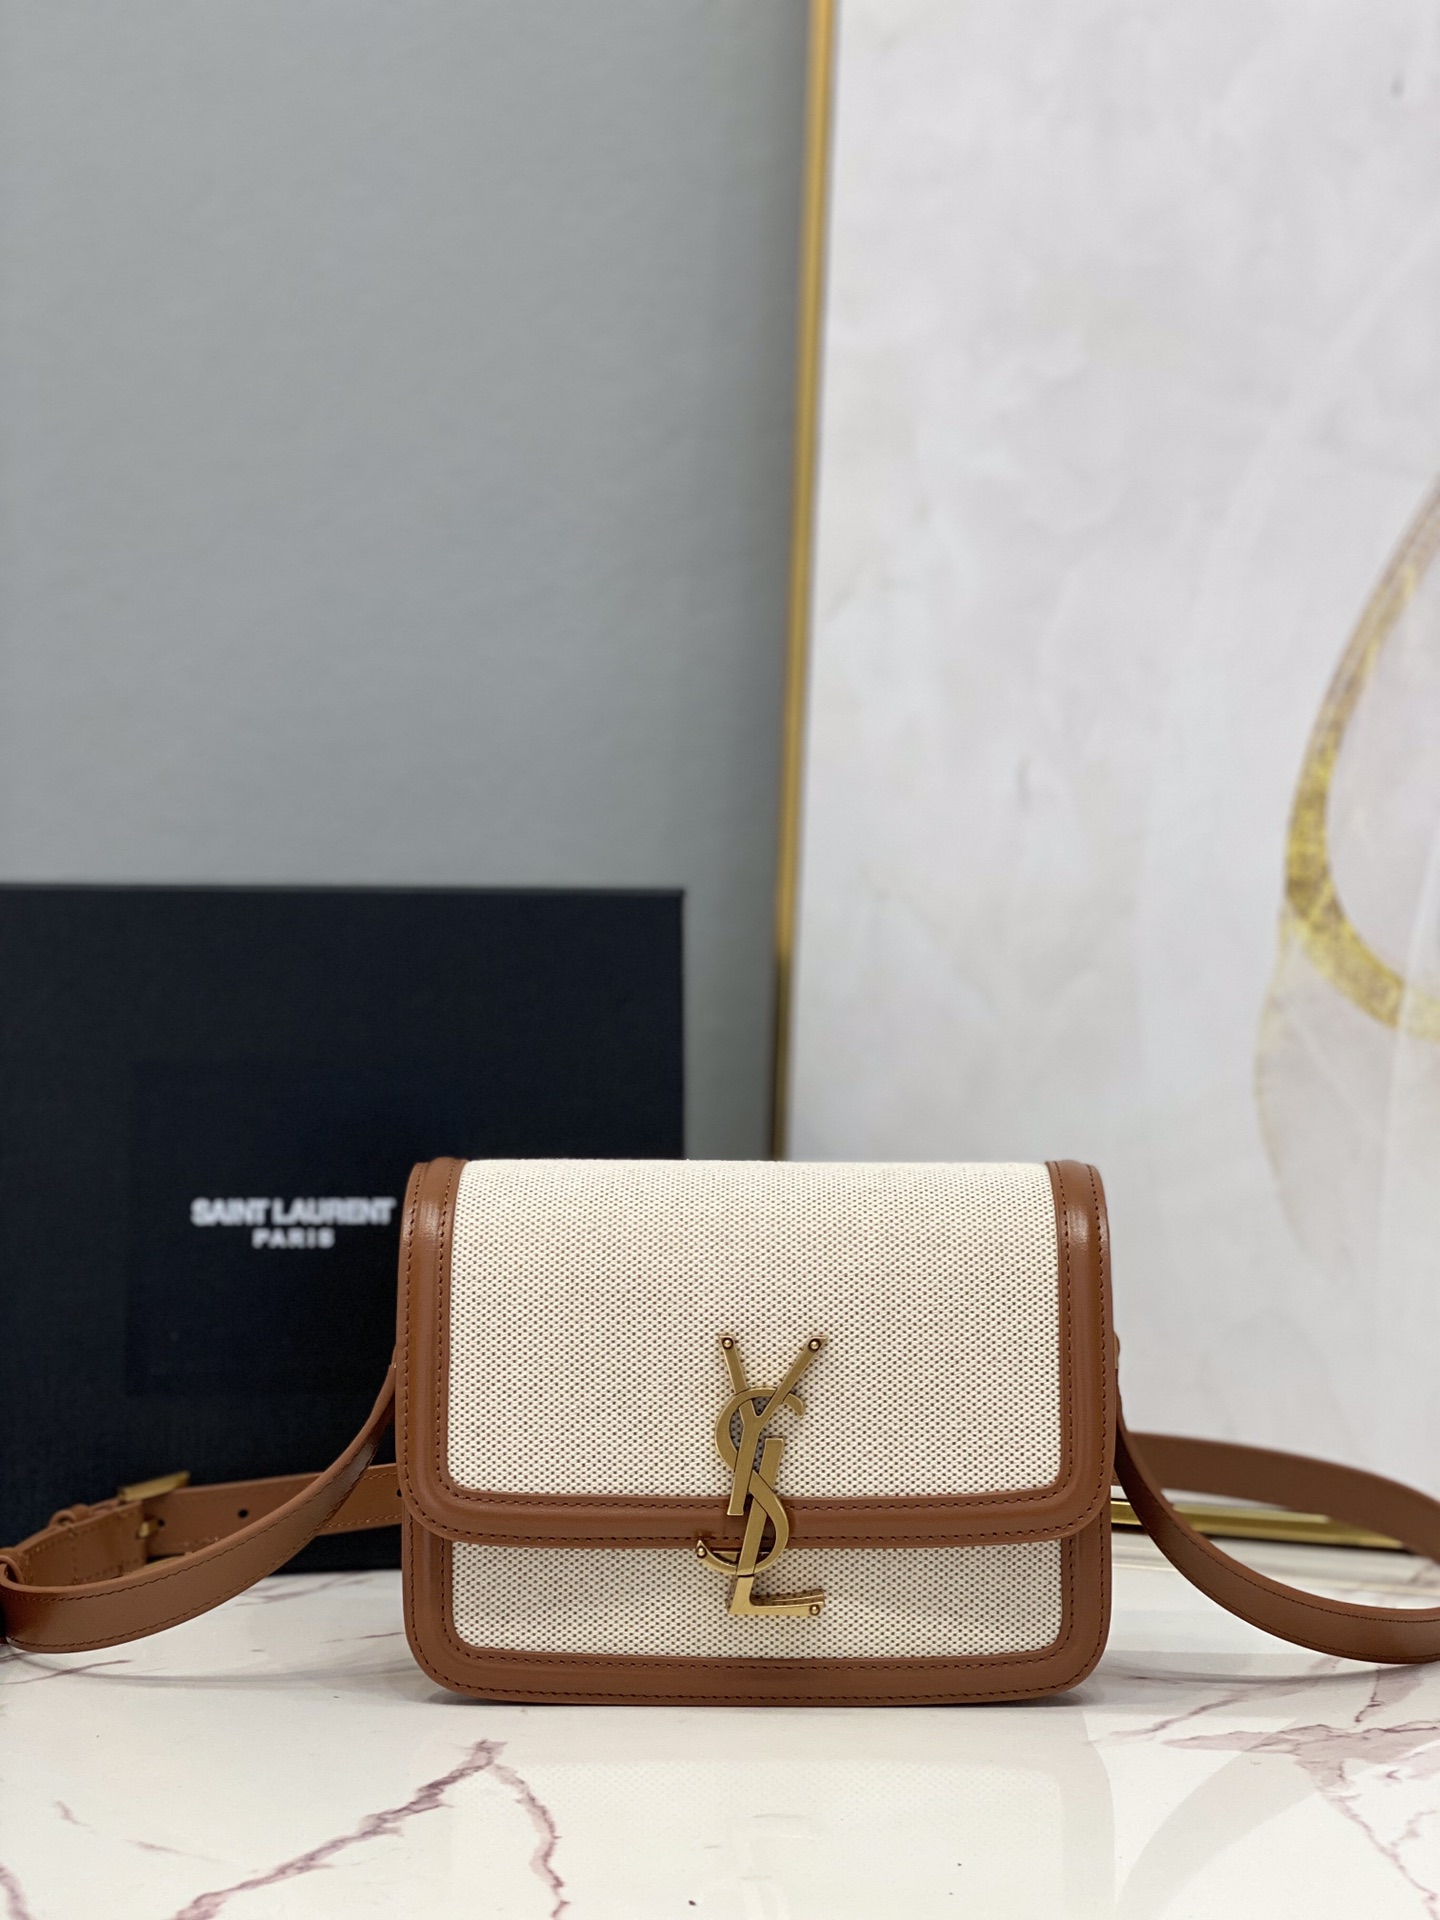 2021 cheap Saint Laurent solferino small satchel in cotton canvas and leather